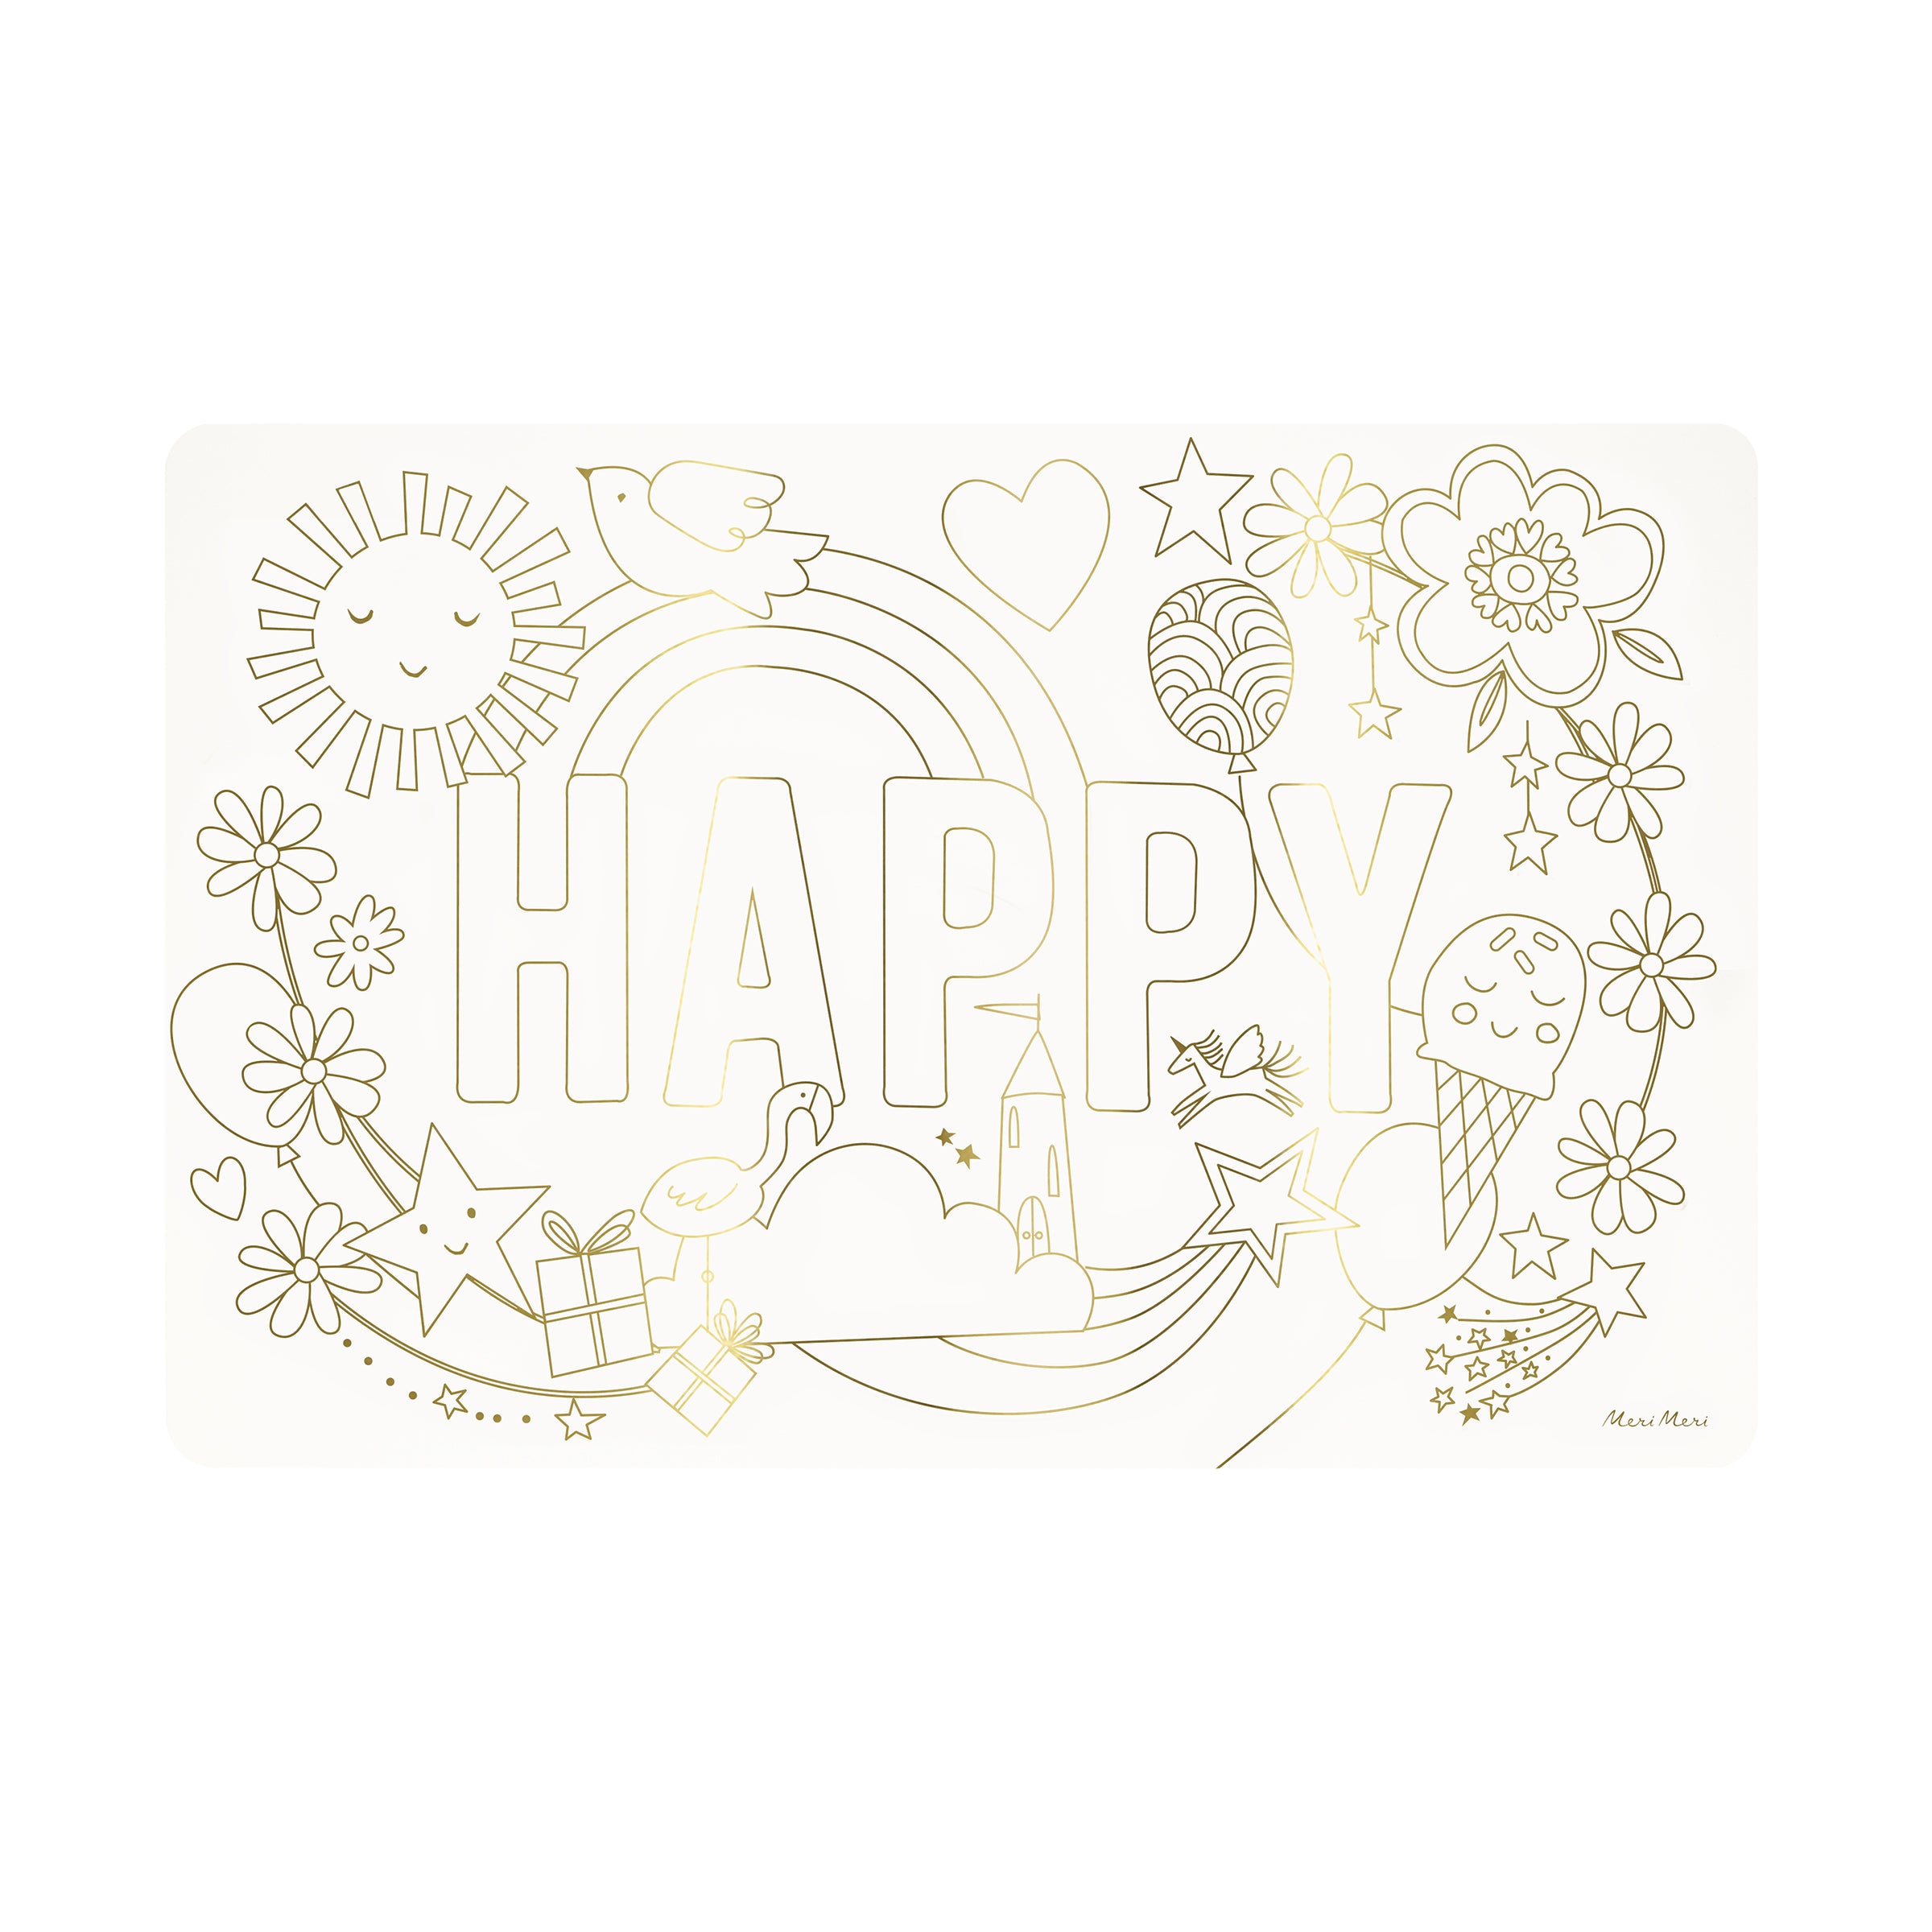 Coloring time is here, with out special kids placemats featuring happy illustrations.